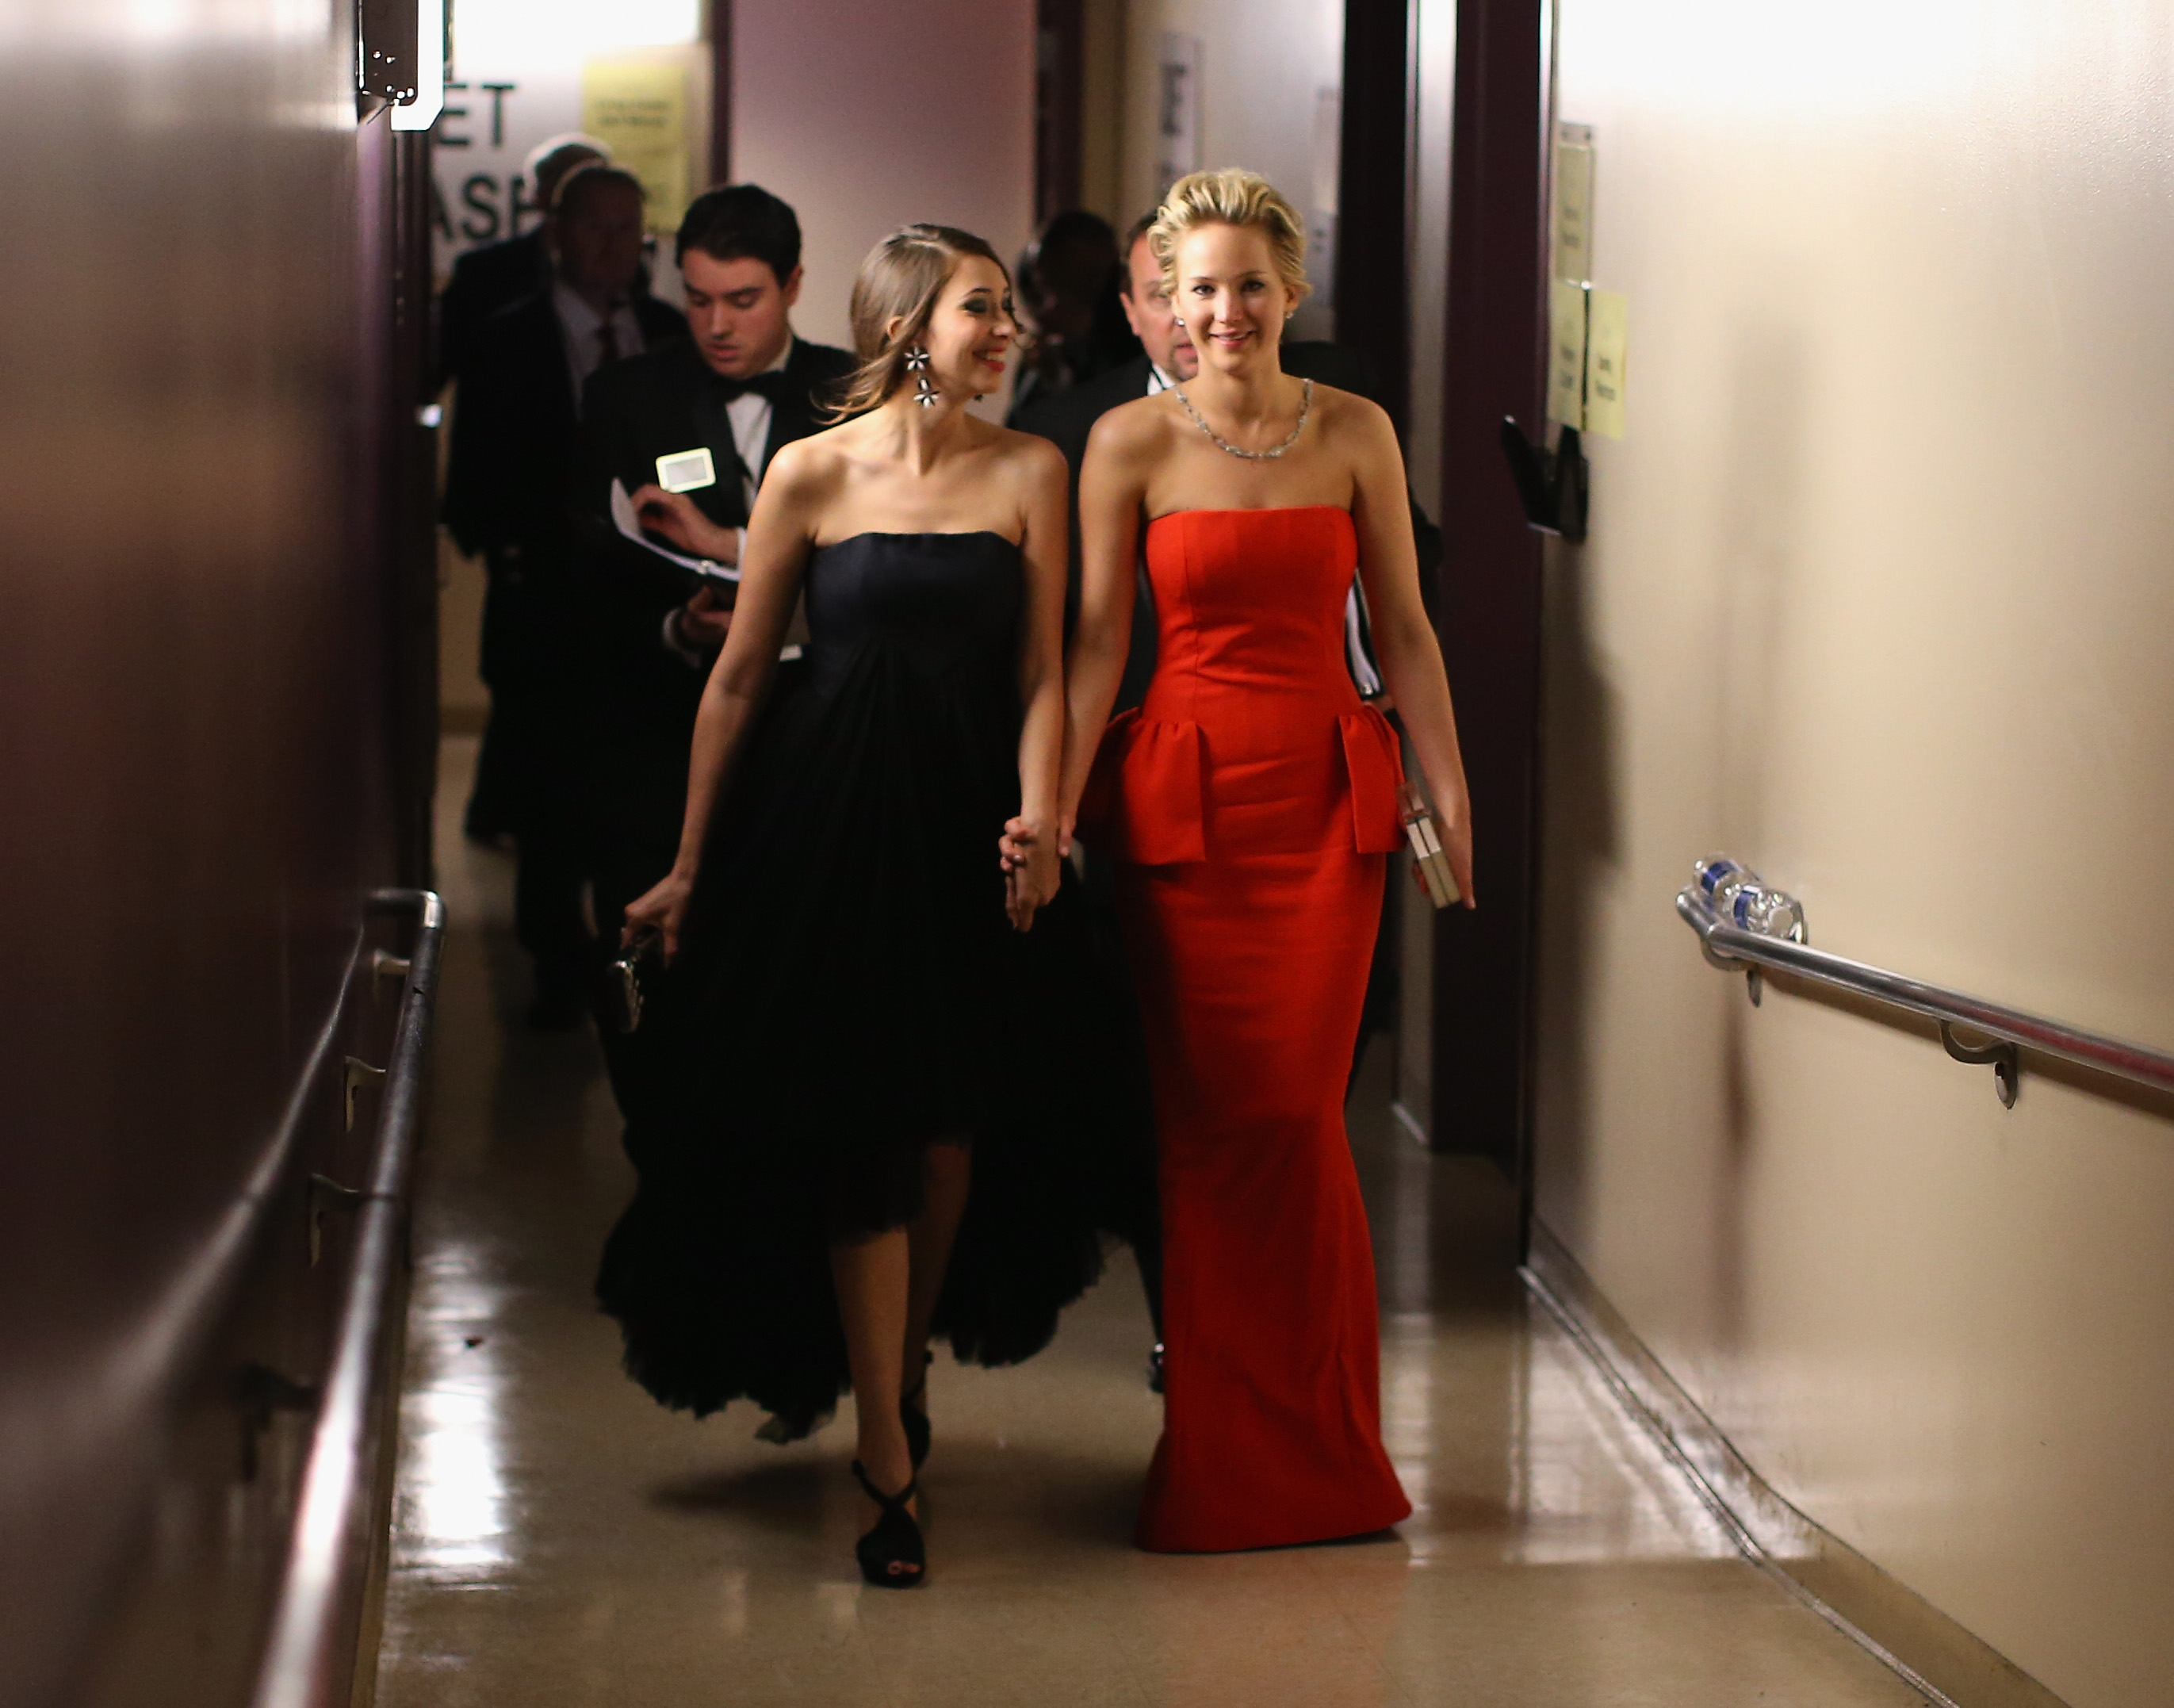 Actress Jennifer Lawrence and friend Laura Simpson backstage during the Oscars held at Dolby Theatre on March 2, 2014 in Hollywood, California. (Christopher Polk—Getty Images)